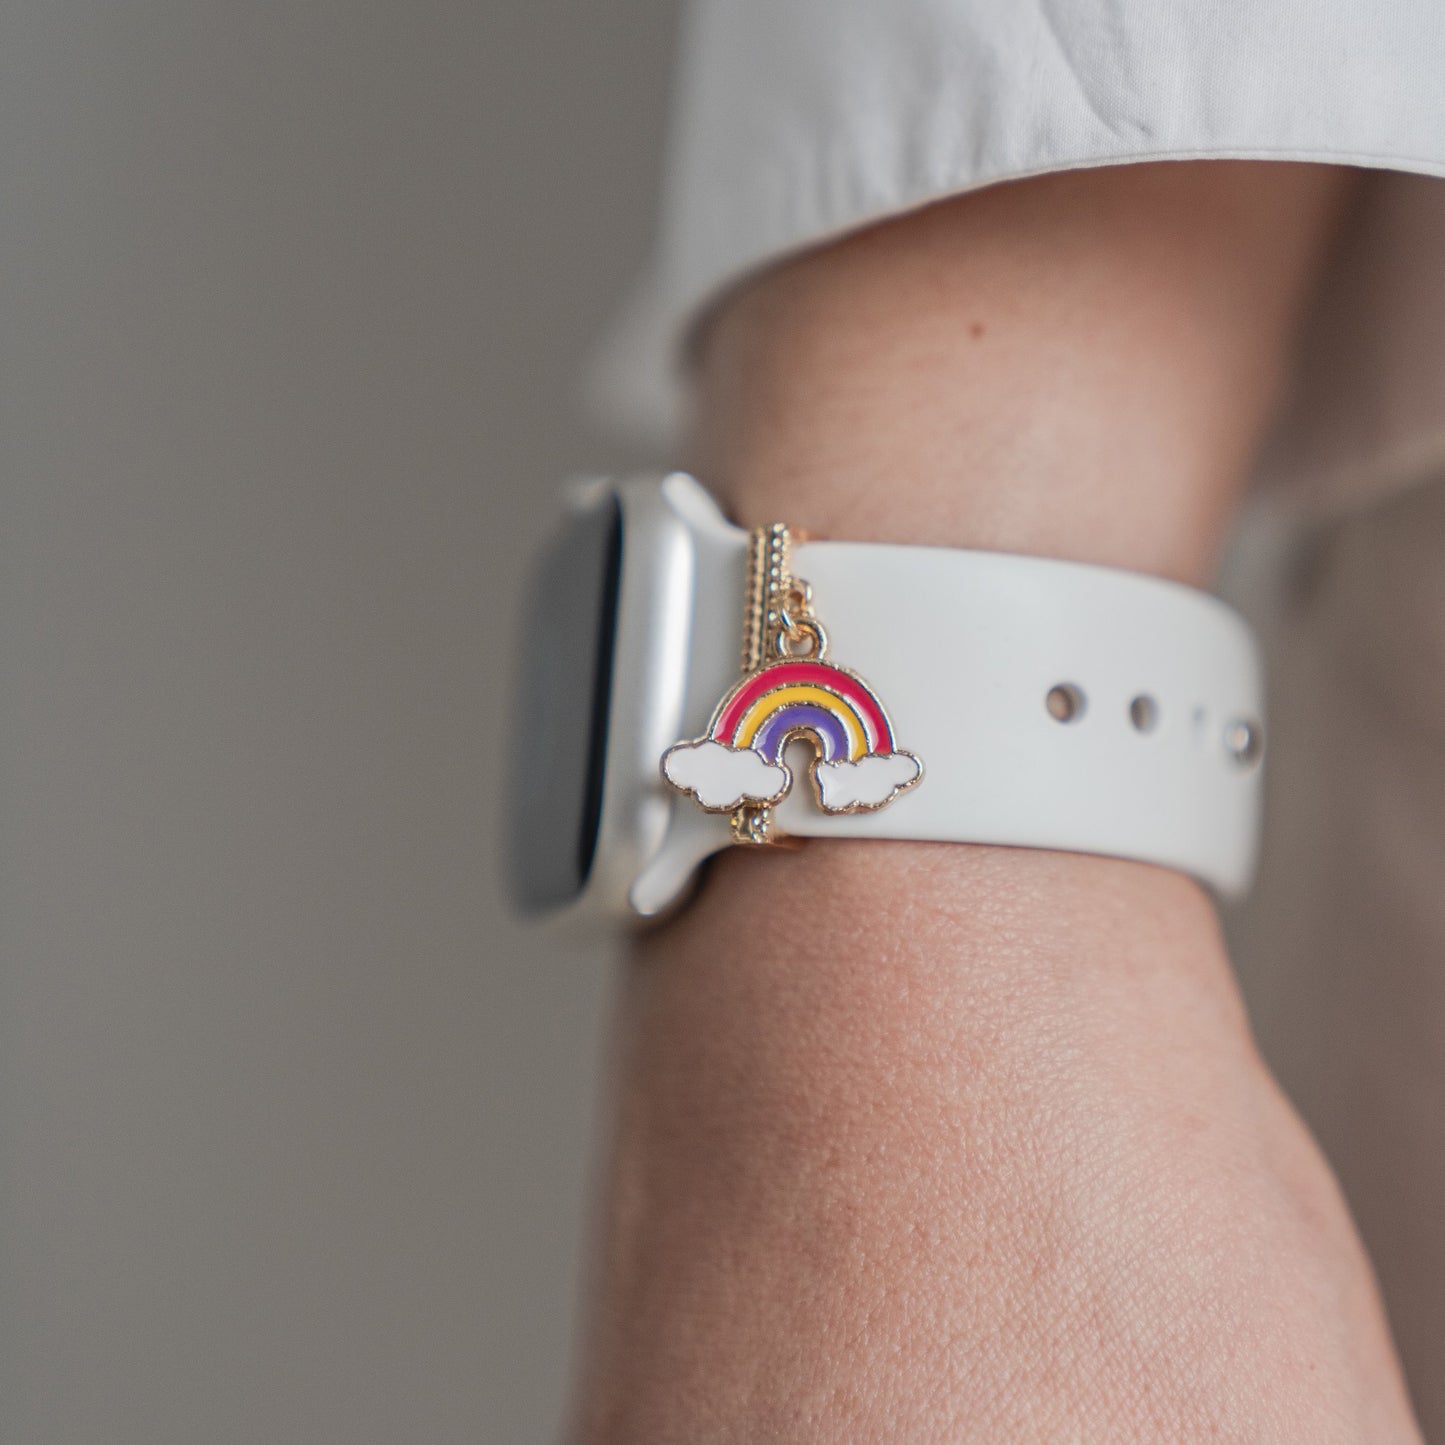 arktisband Apple Watch Charms "Rainbow Clouds"